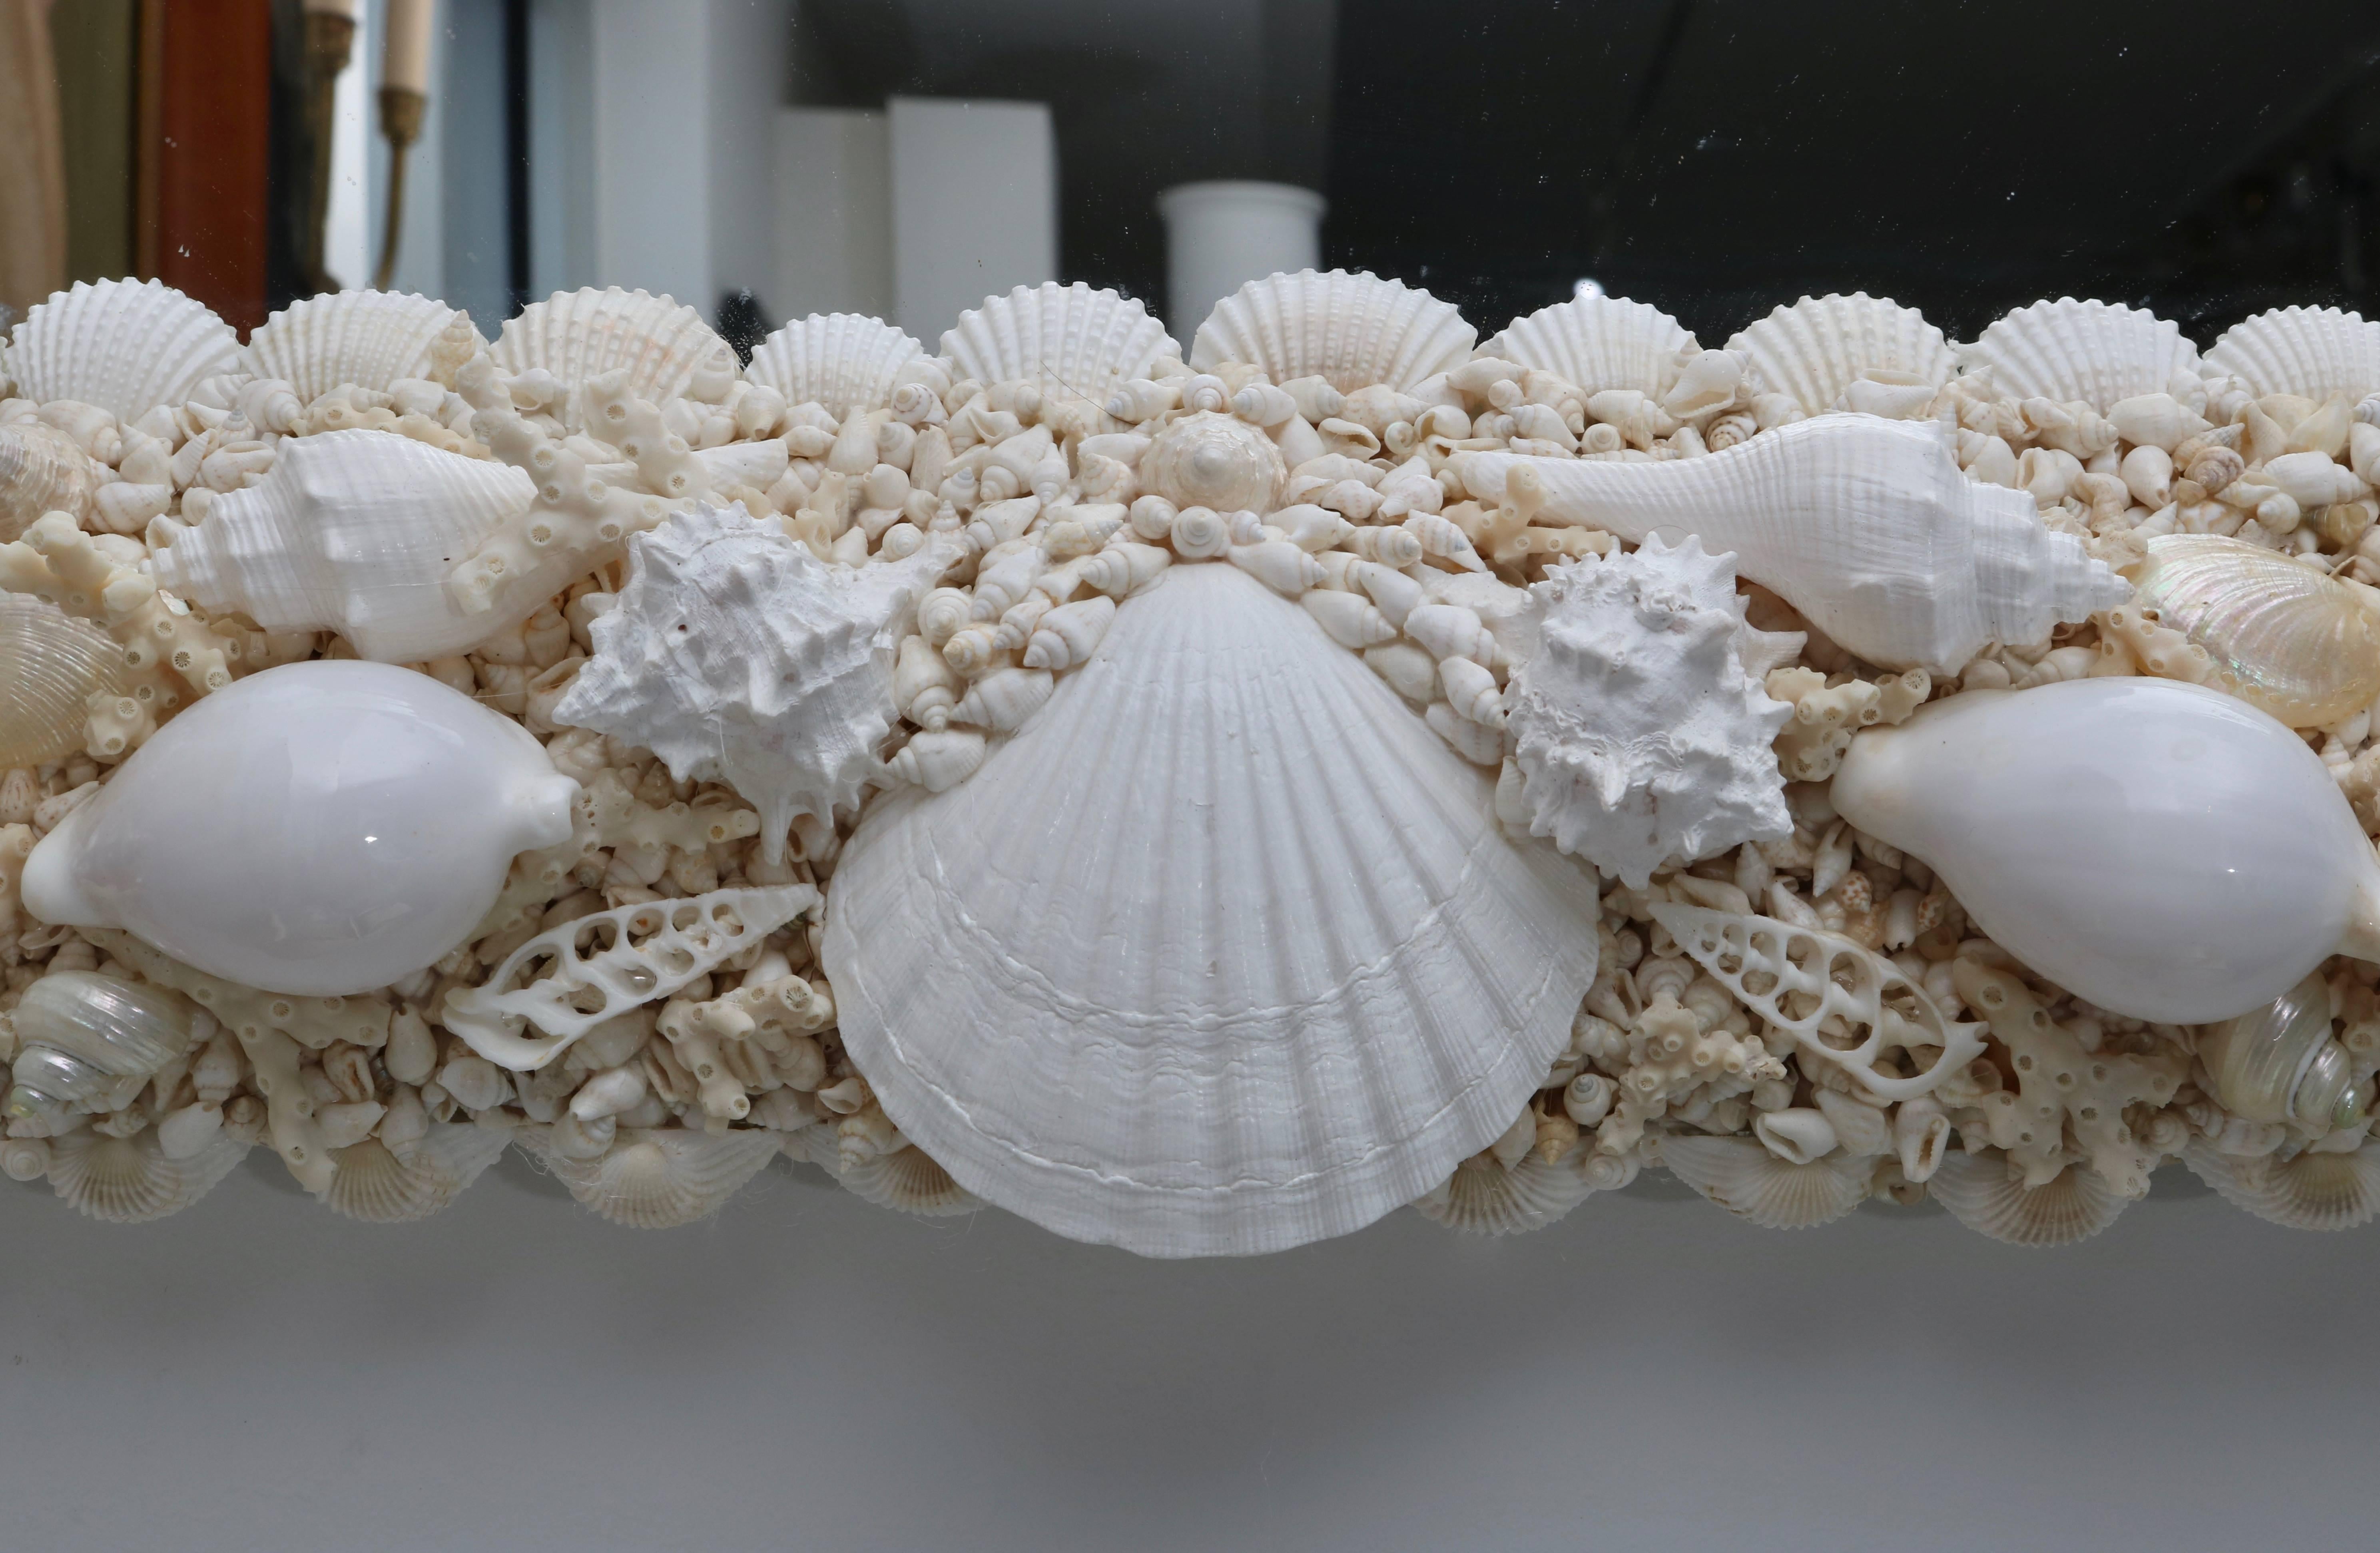 This stylish seashell encrusted mirror was made by a local Palm Beach artisan and definitely takes its inspiration from pieces used in the interiors of Tony Douquette.

For best net trade price or additional questions regarding this item, please